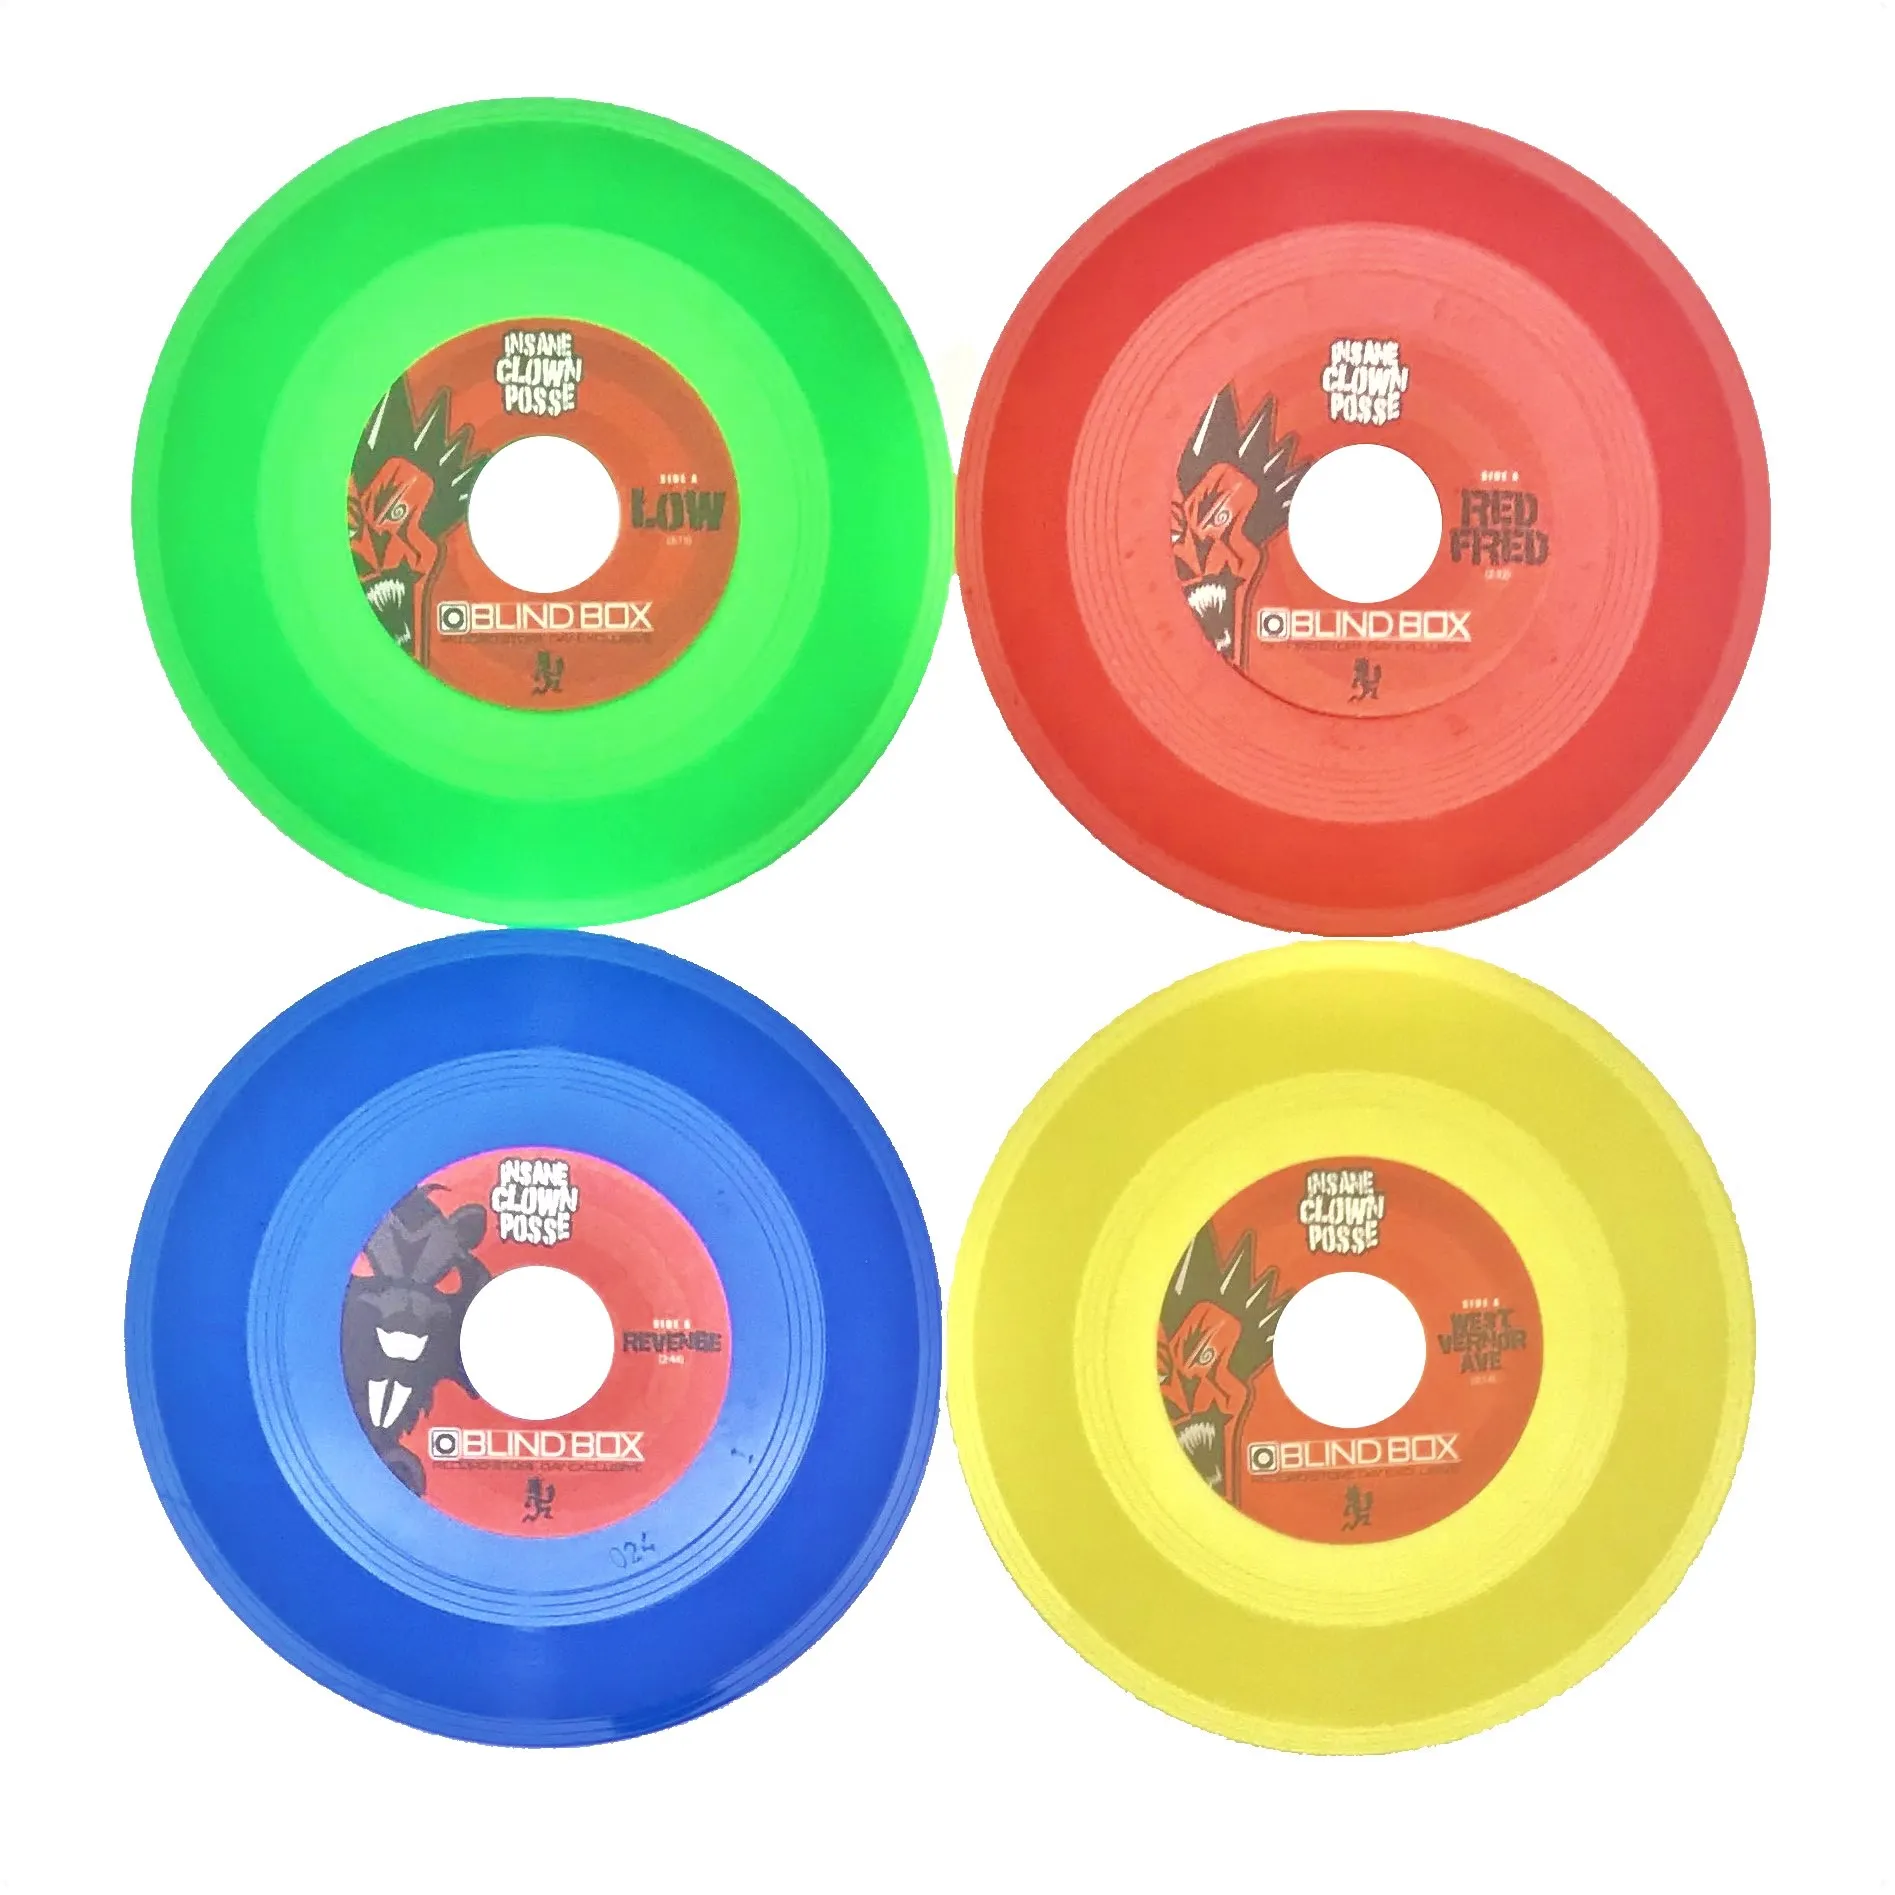 This new translucent mini-turntable plays 3” records